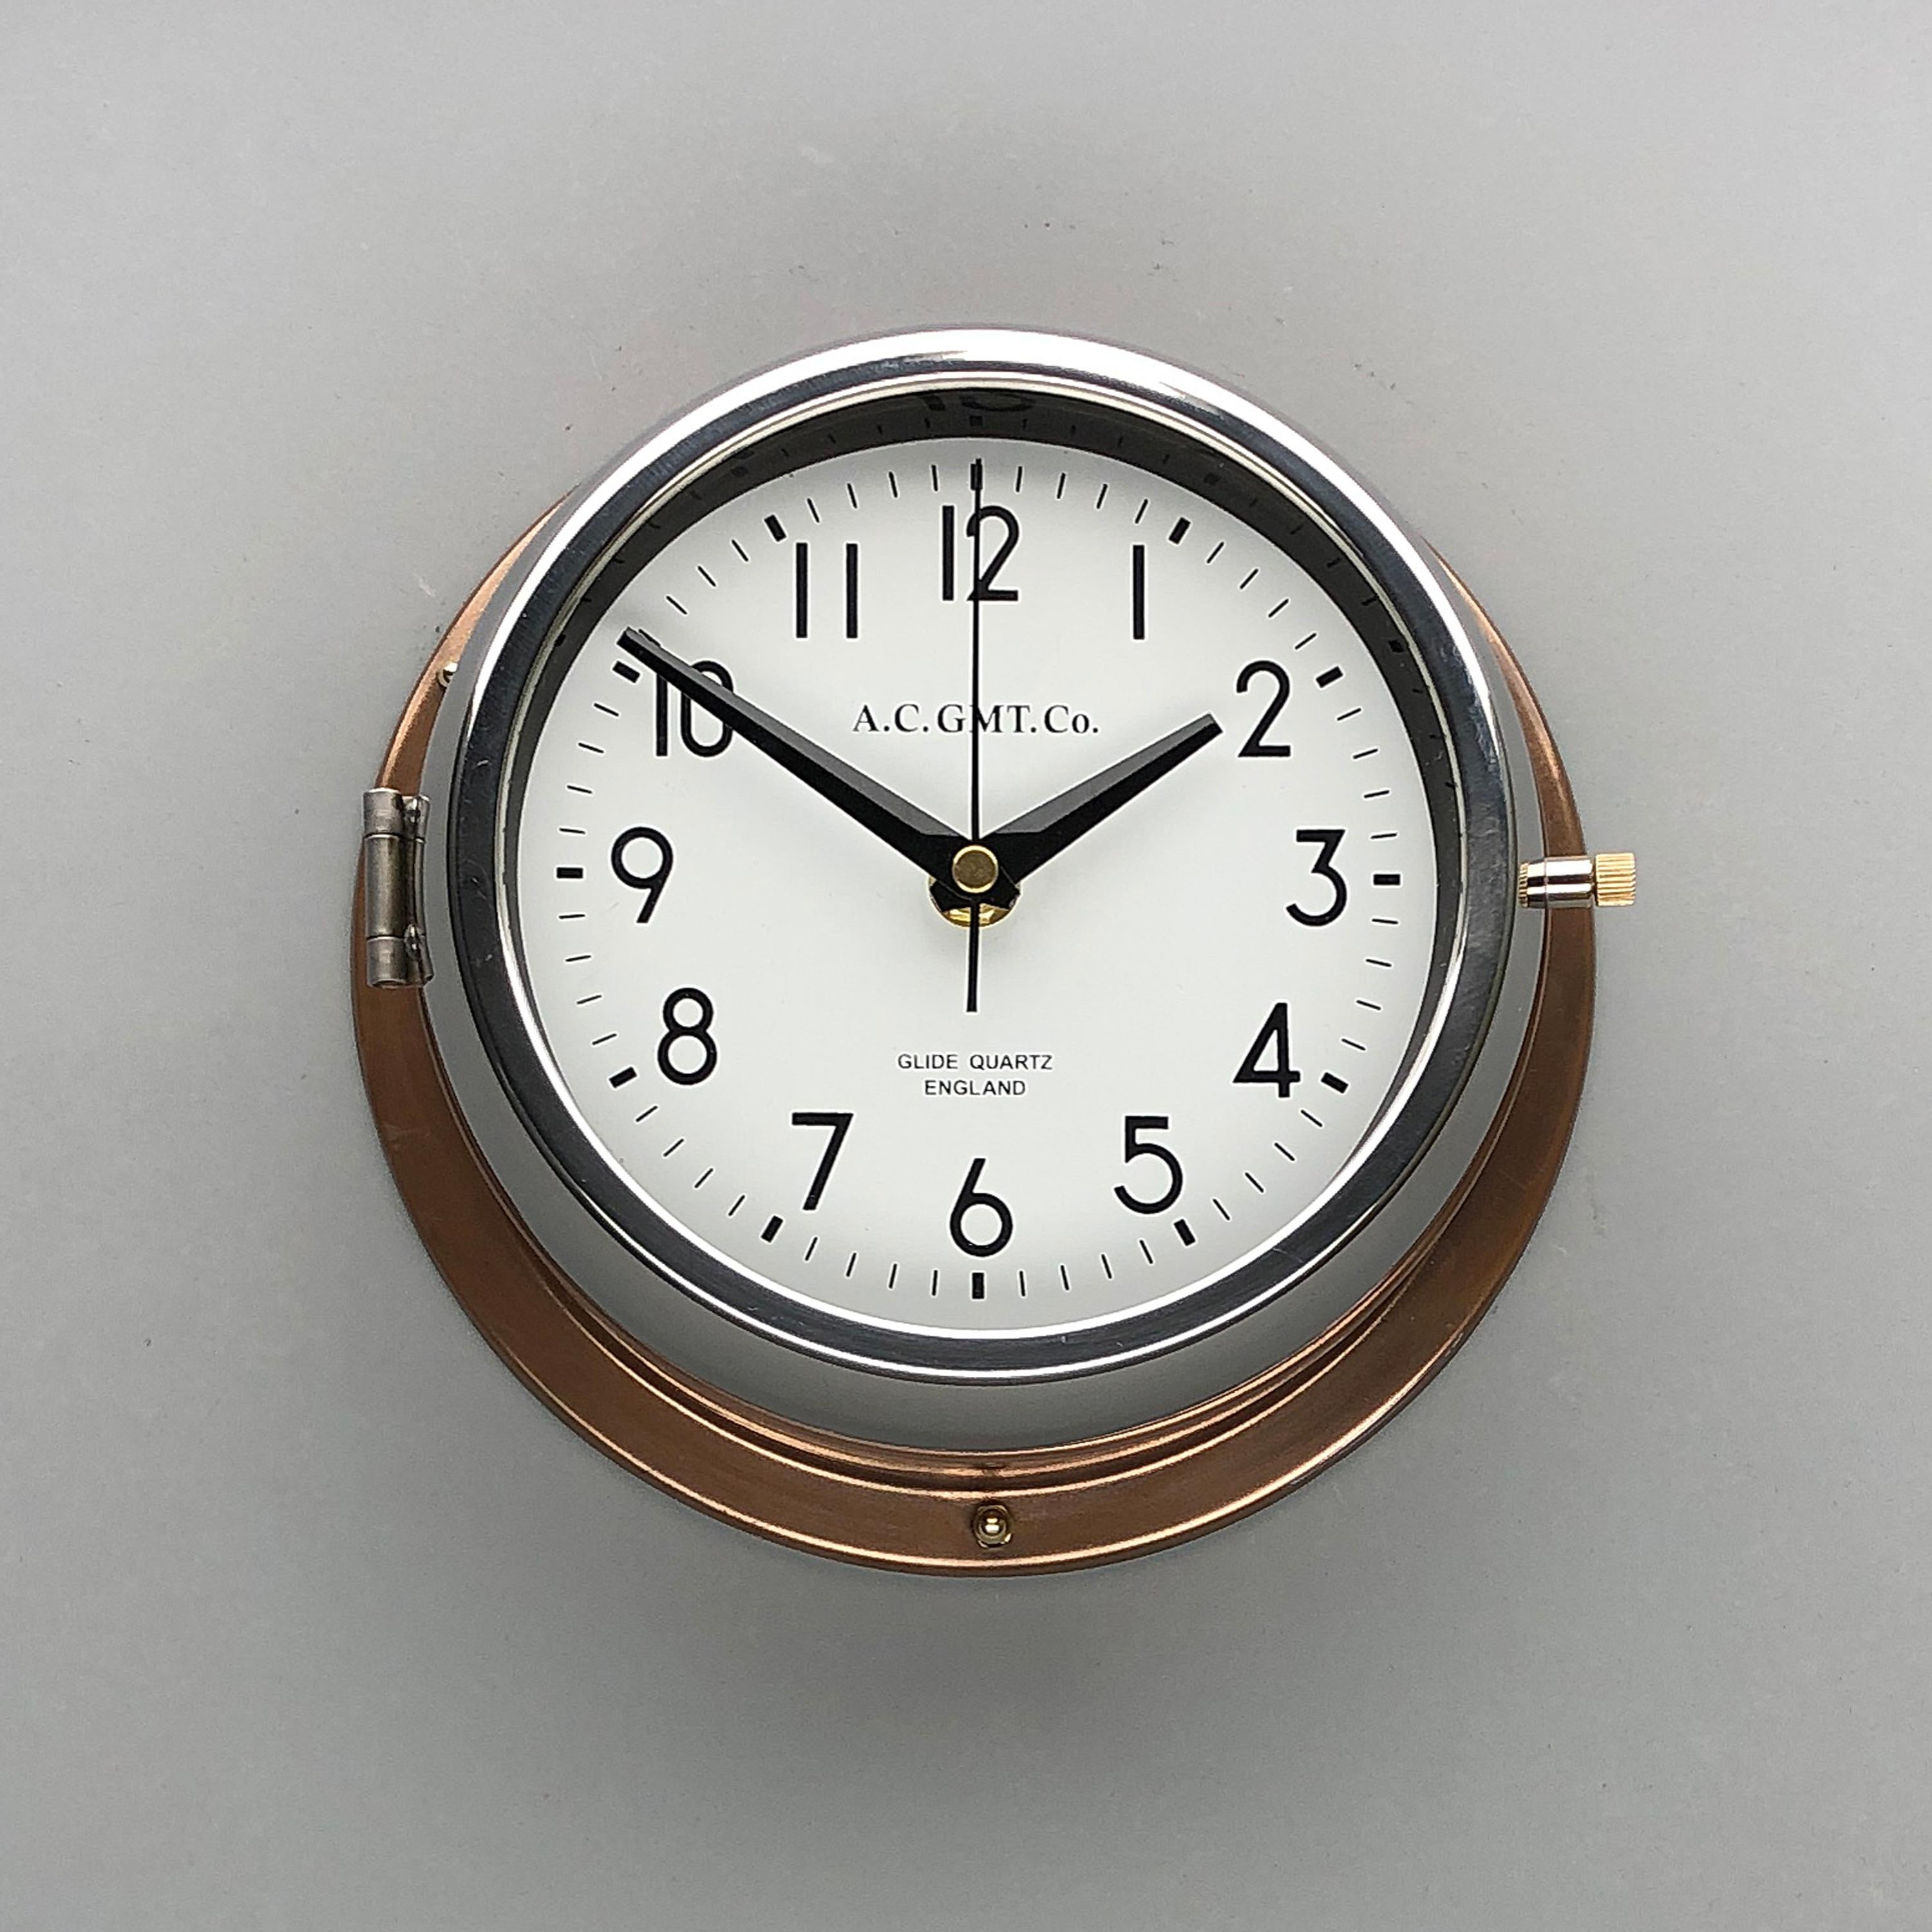 1970s British Bronze and Chrome AC GMT Co. Industrial Wall Clock White Dial 11